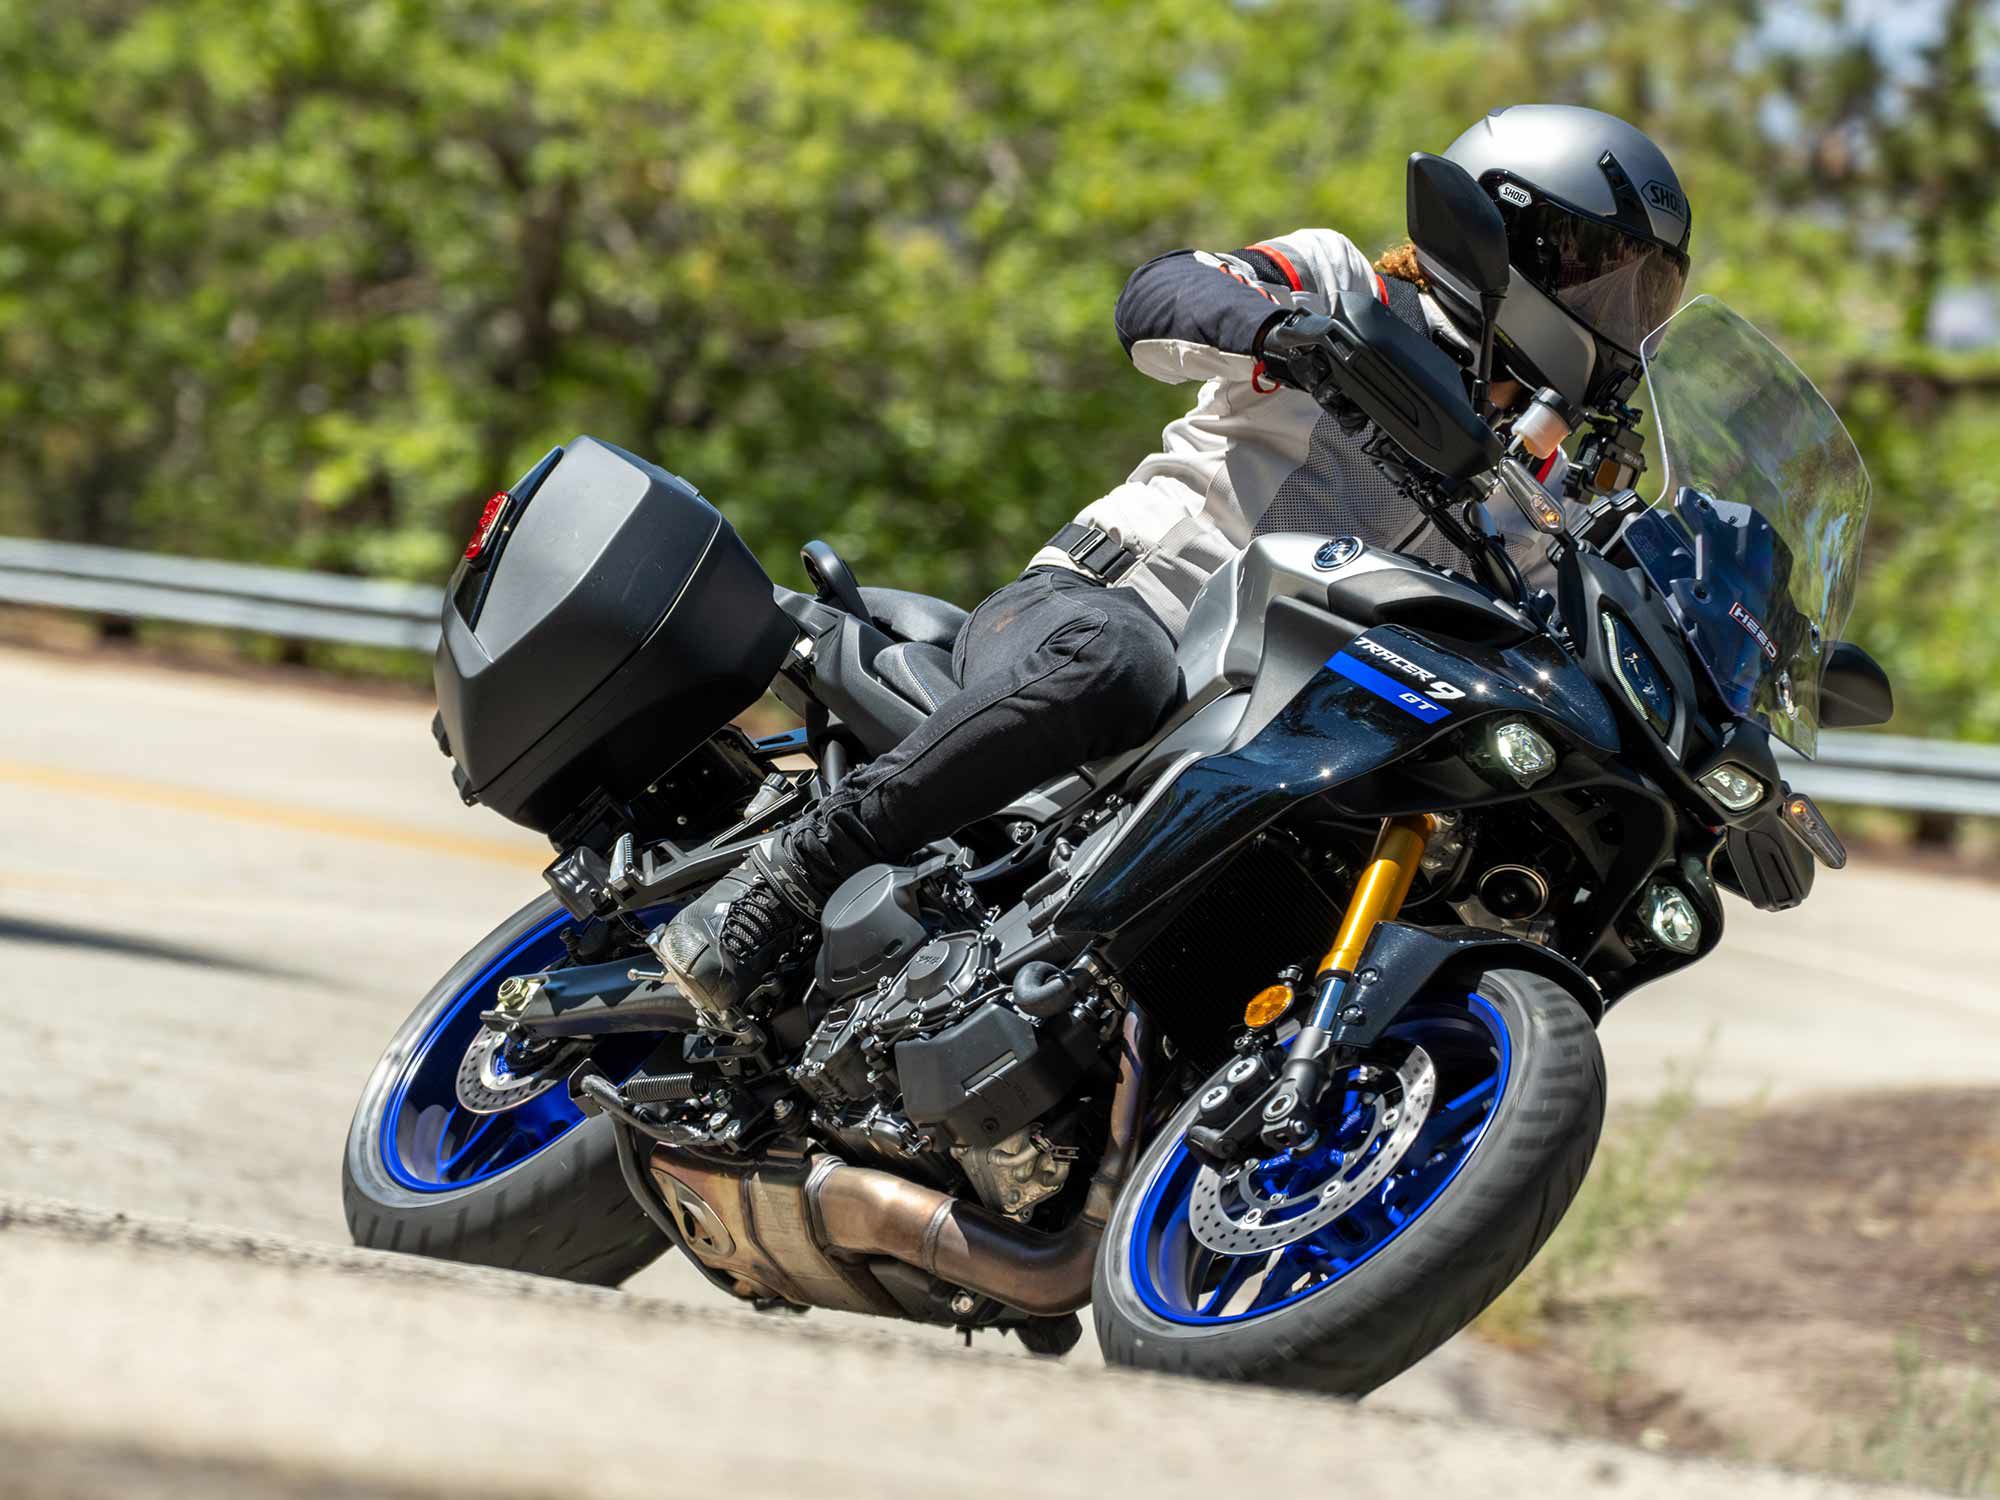 Yamaha’s Tracer 9 GT generally handles well for a 503-pound motorcycle. But its suspension isn’t as poised during fast-paced rides as the MT-09.